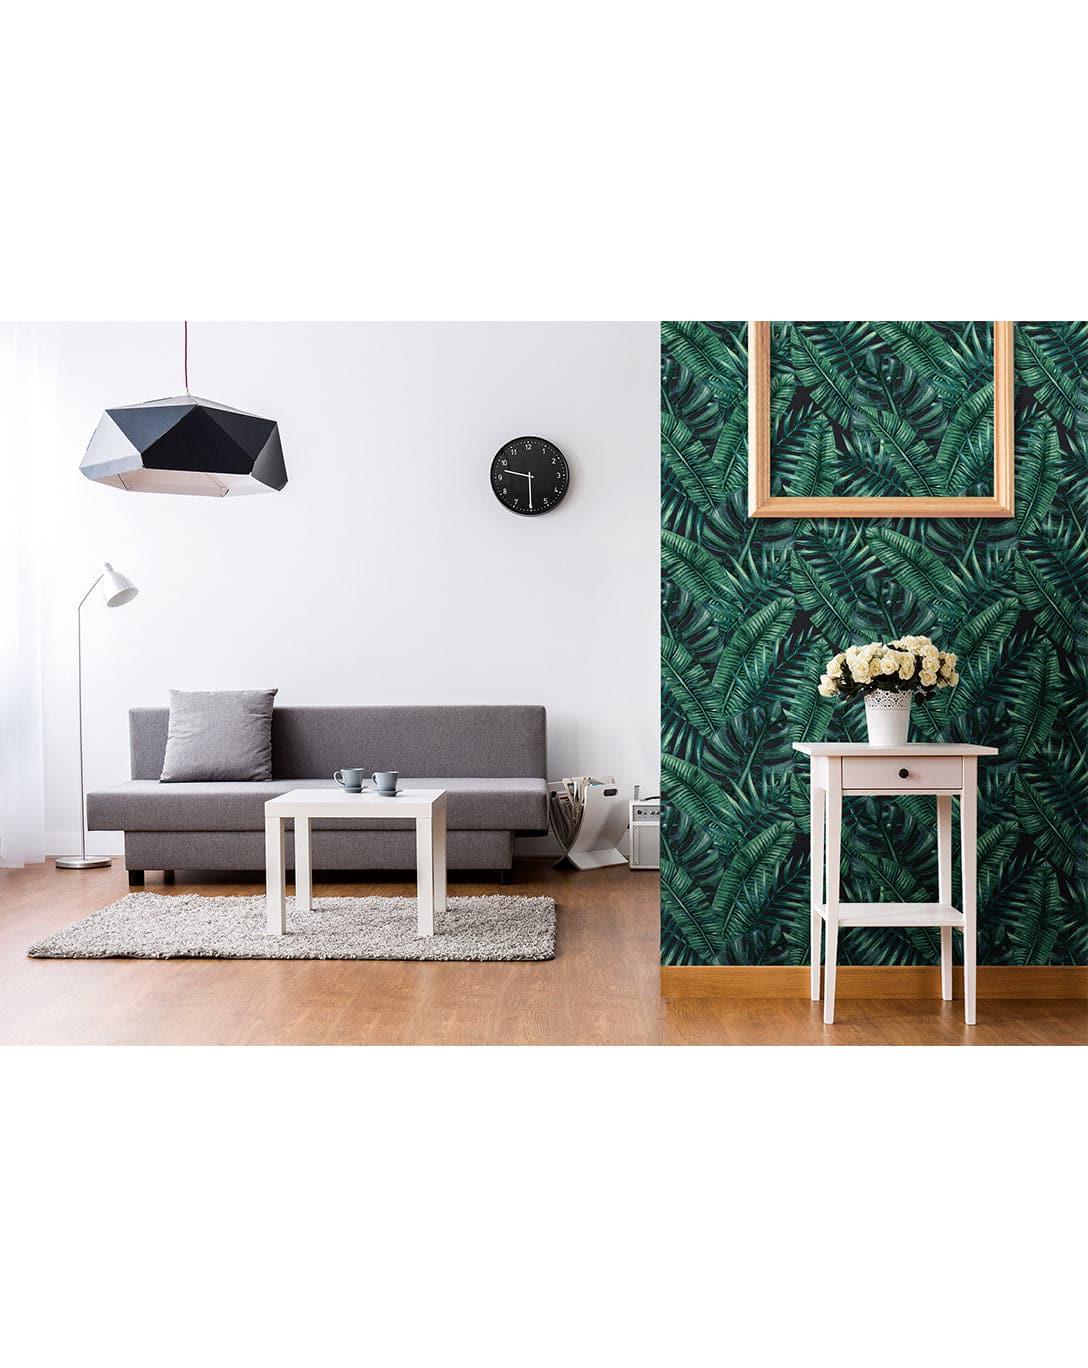 Tropical Jungle Monstera Palm Leaves Removable Wallpaper Tropical Jungle Monstera Palm Leaves Removable Wallpaper Tropical Jungle Monstera Palm Leaves Removable Wallpaper 